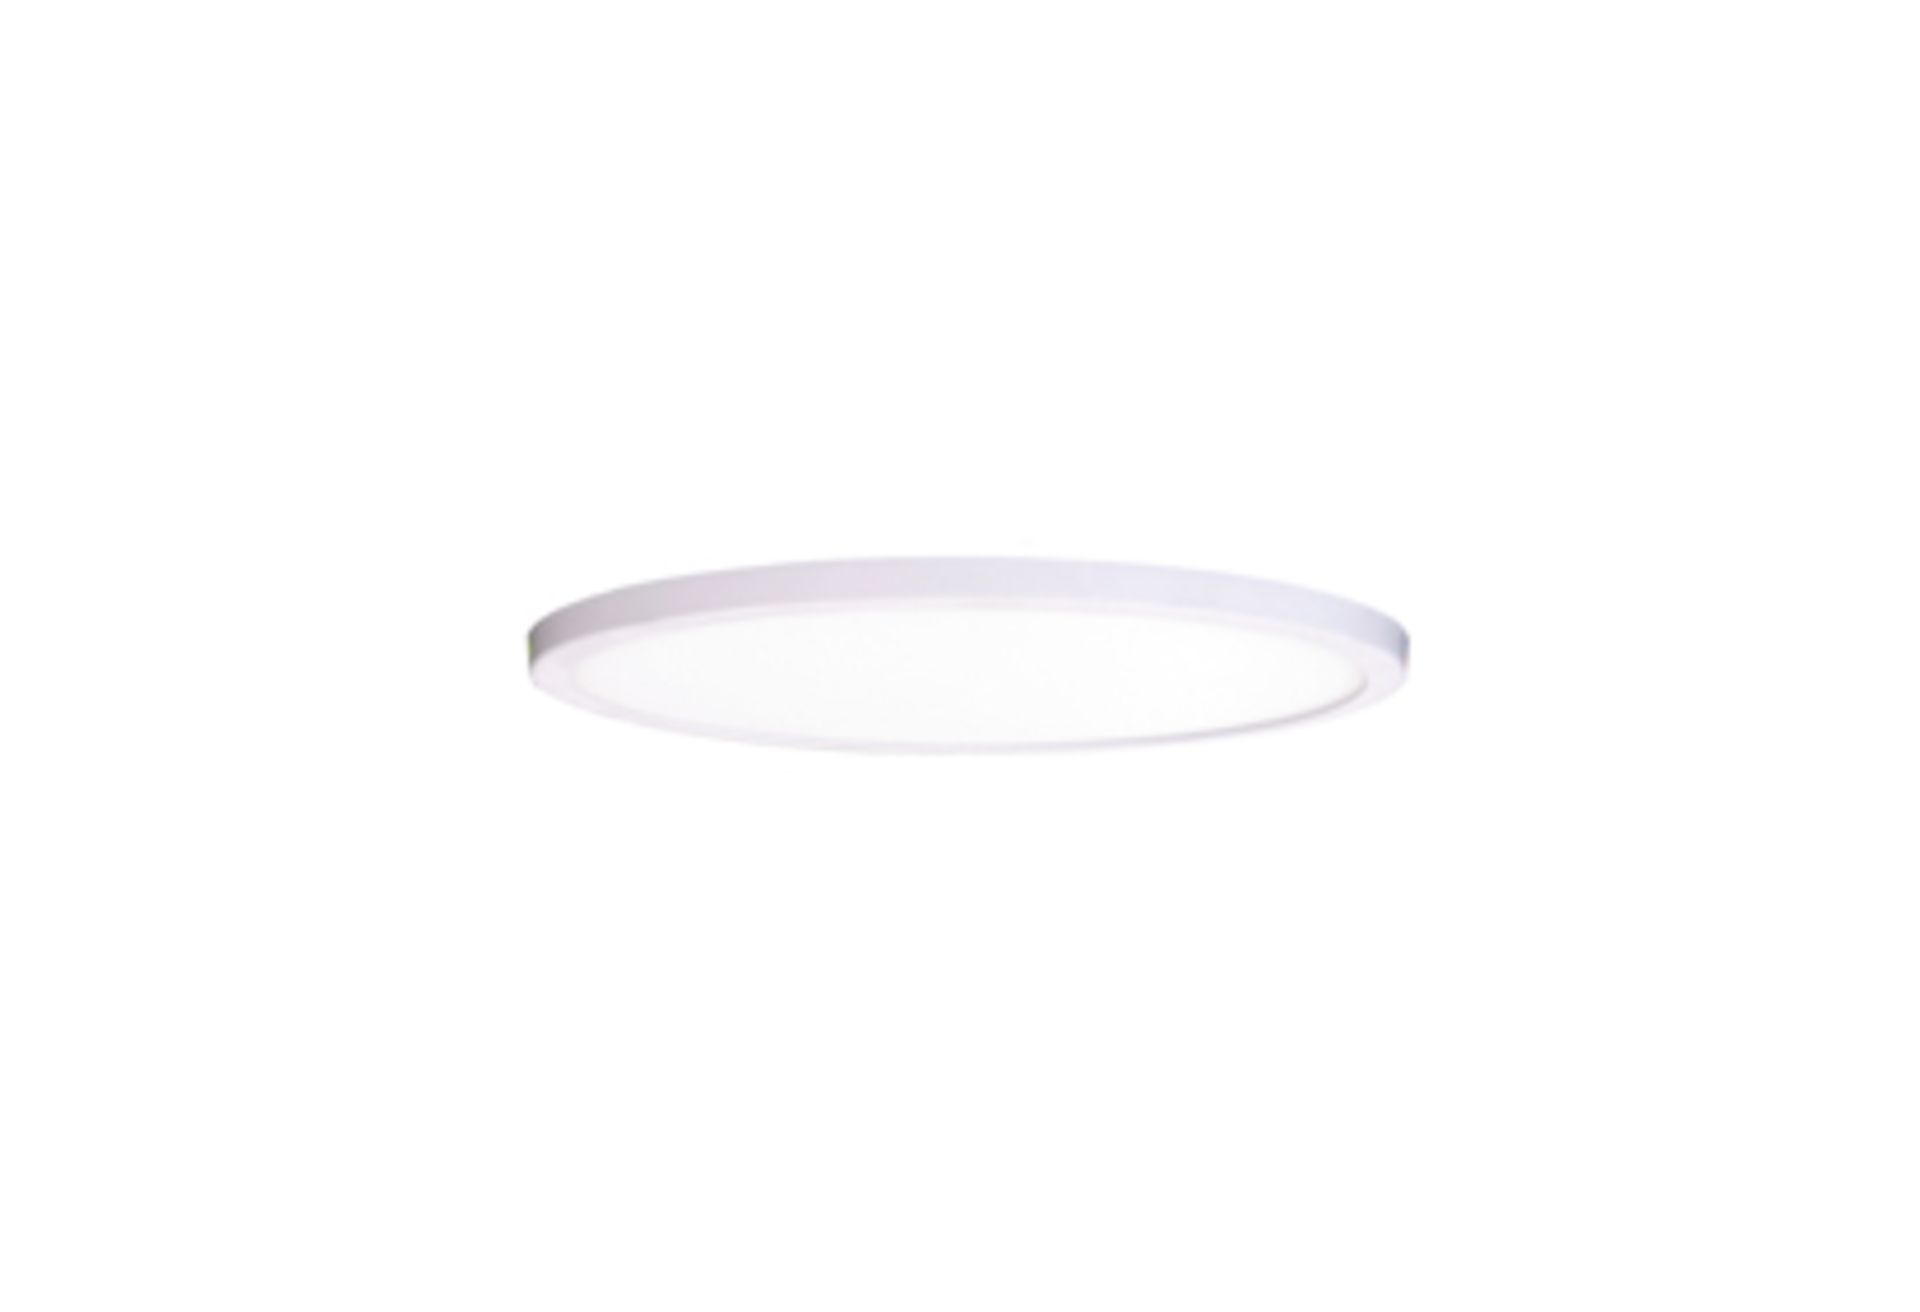 36 8w 586LM small circular Panels, product code T4CLP0586EZ - Image 2 of 3